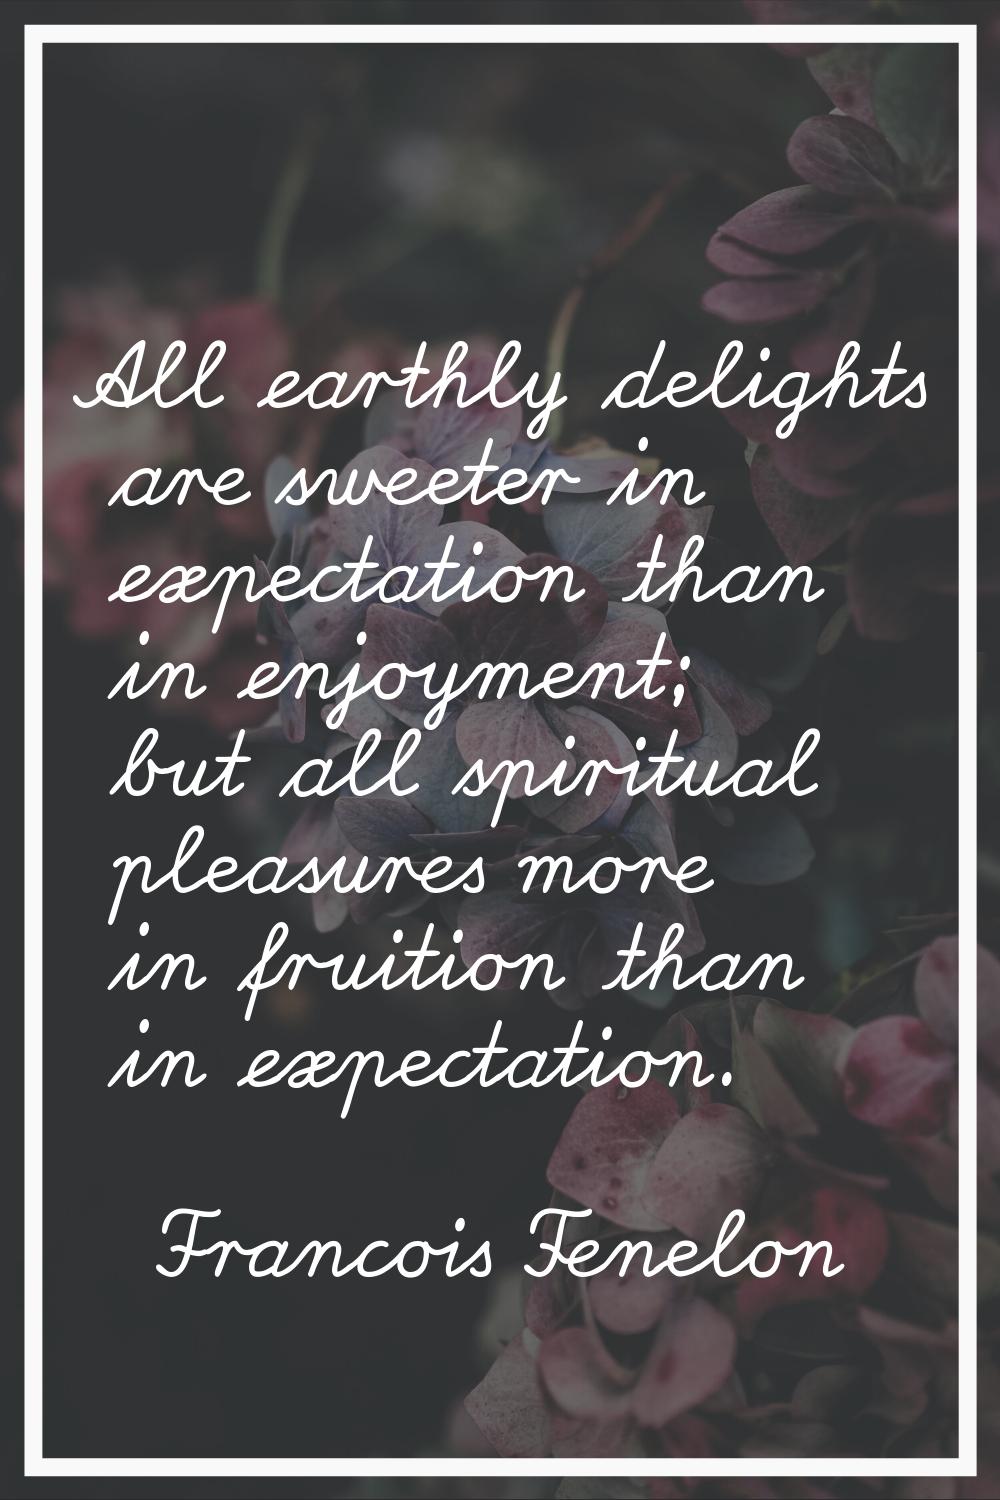 All earthly delights are sweeter in expectation than in enjoyment; but all spiritual pleasures more